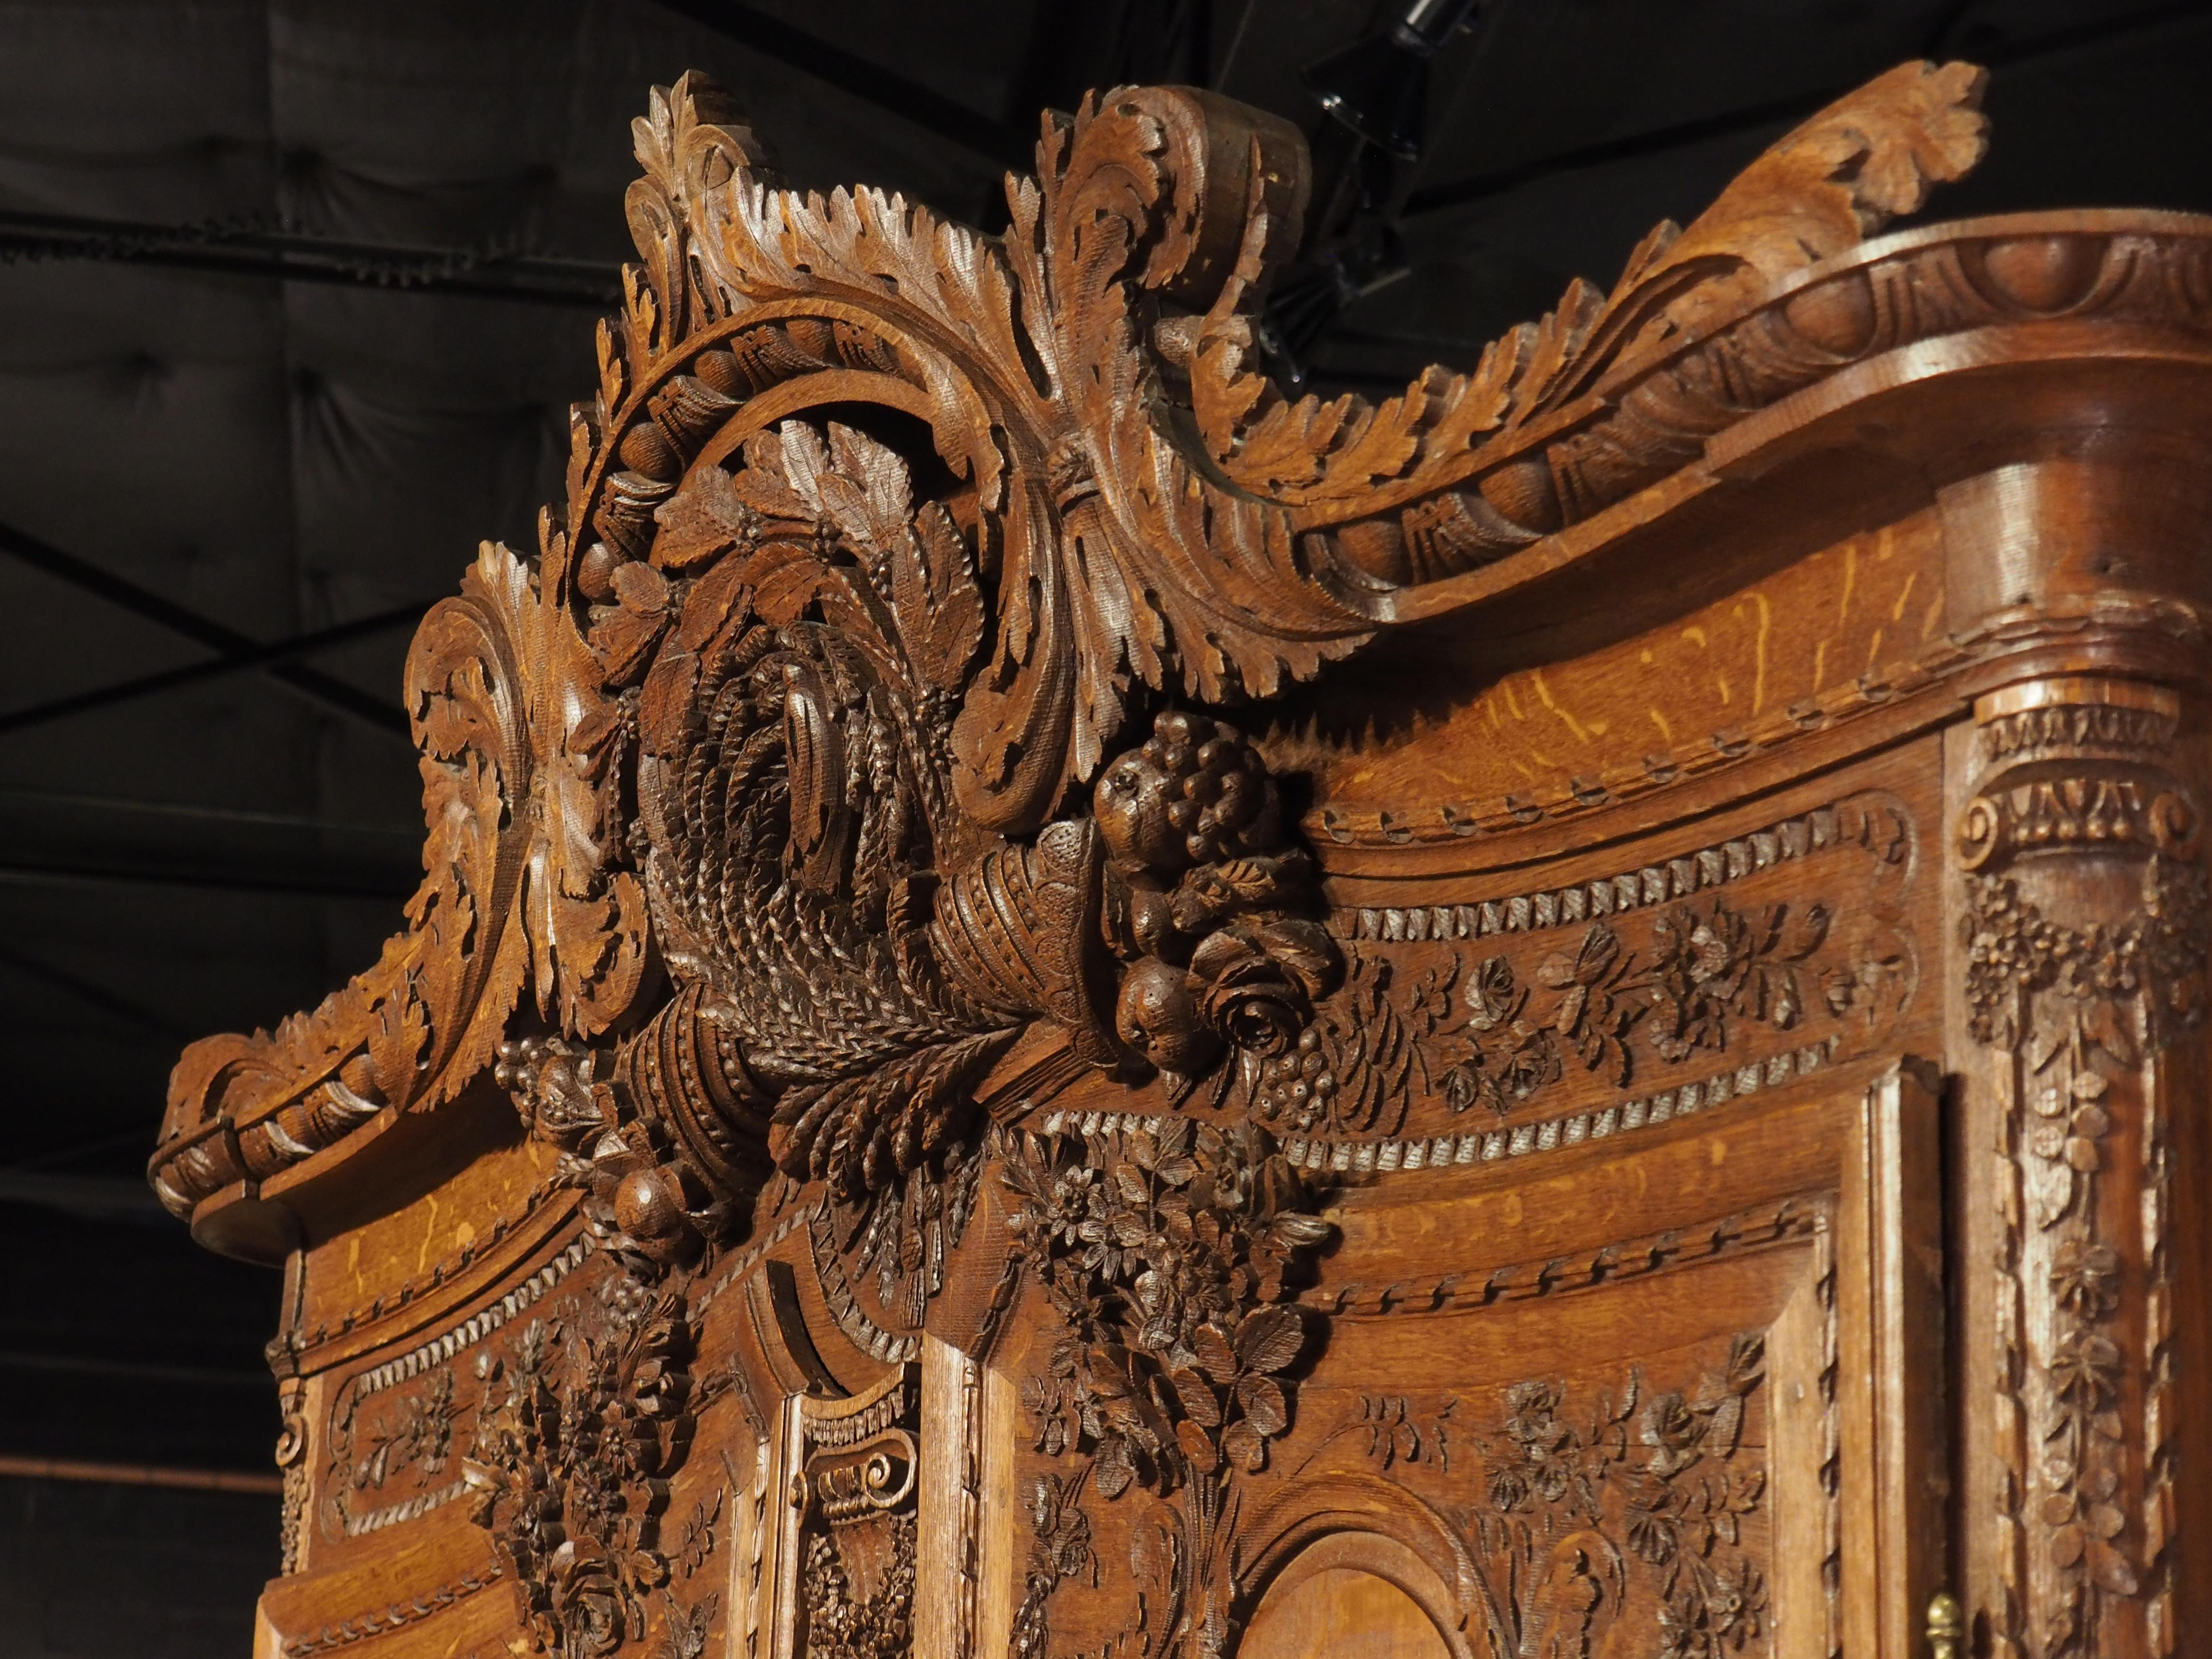 A magnificent example of furniture from Normandy, this French armoire is of museum quality. The 19th century armoire would have been given as a wedding dowry for a bride and based on the size and amount of detailed carvings, it was commissioned by a